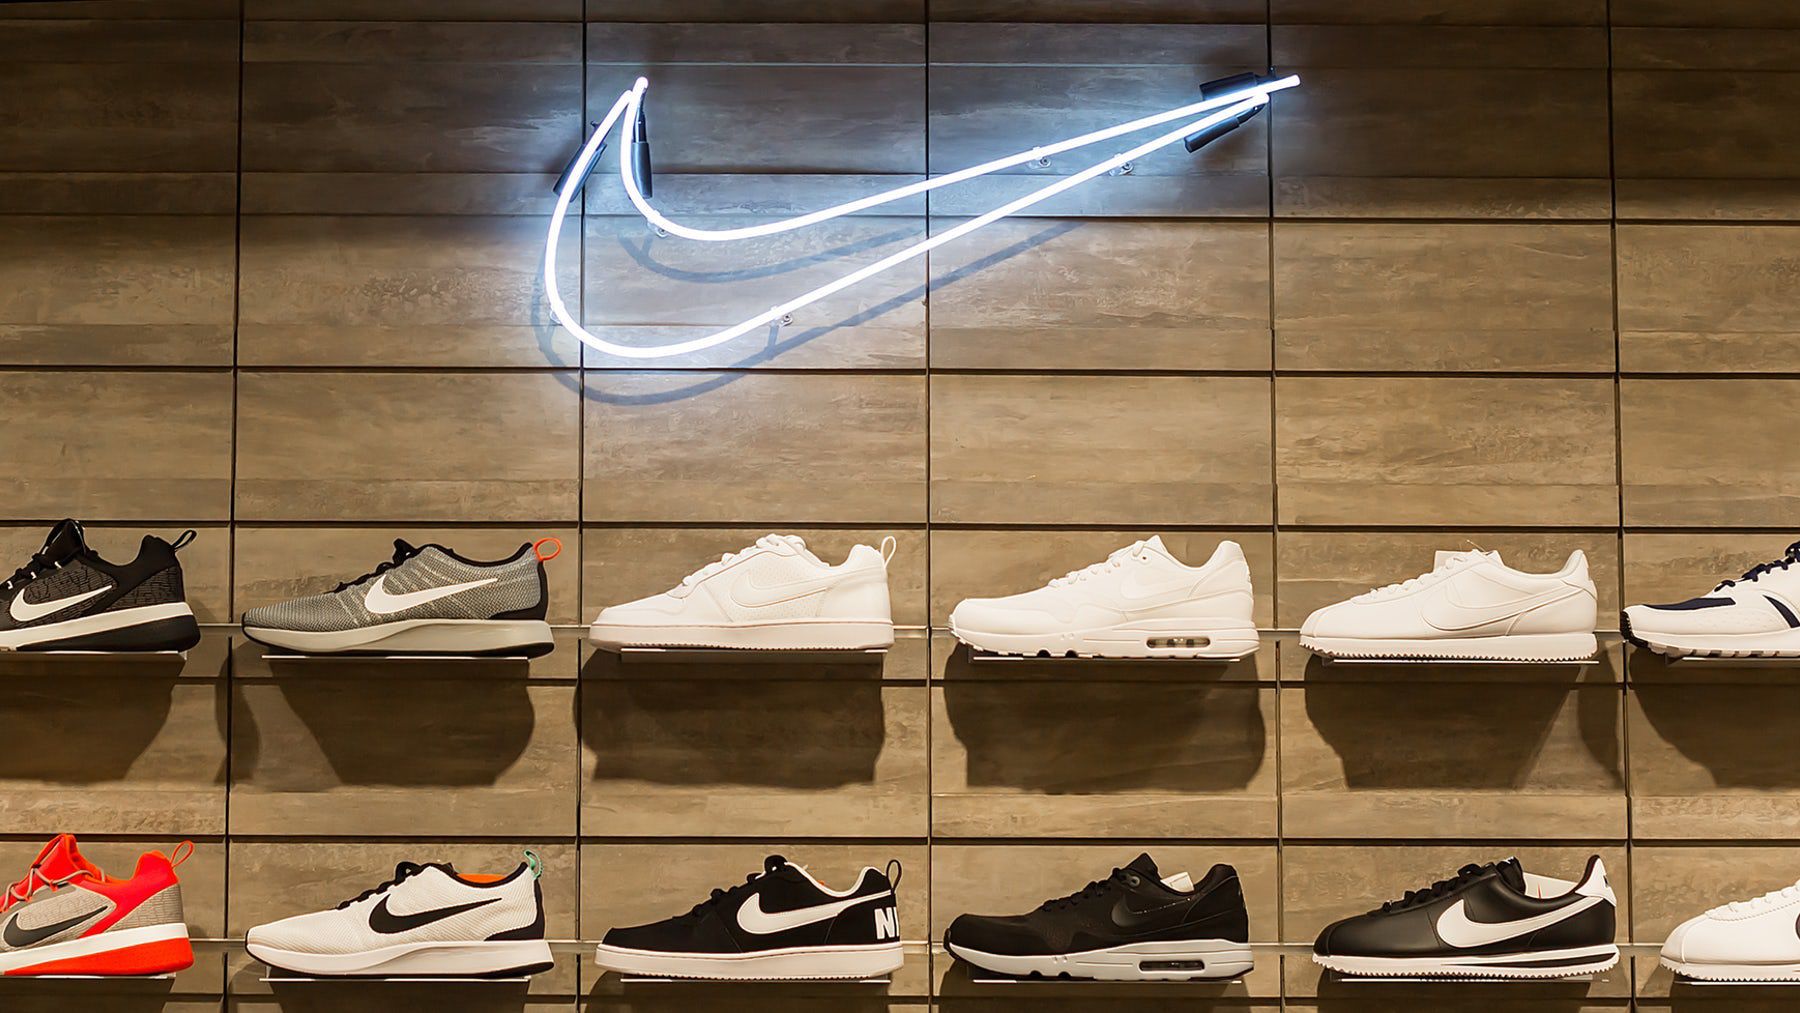 Nike Expected to Forecast Profit Below Wall Street Estimates